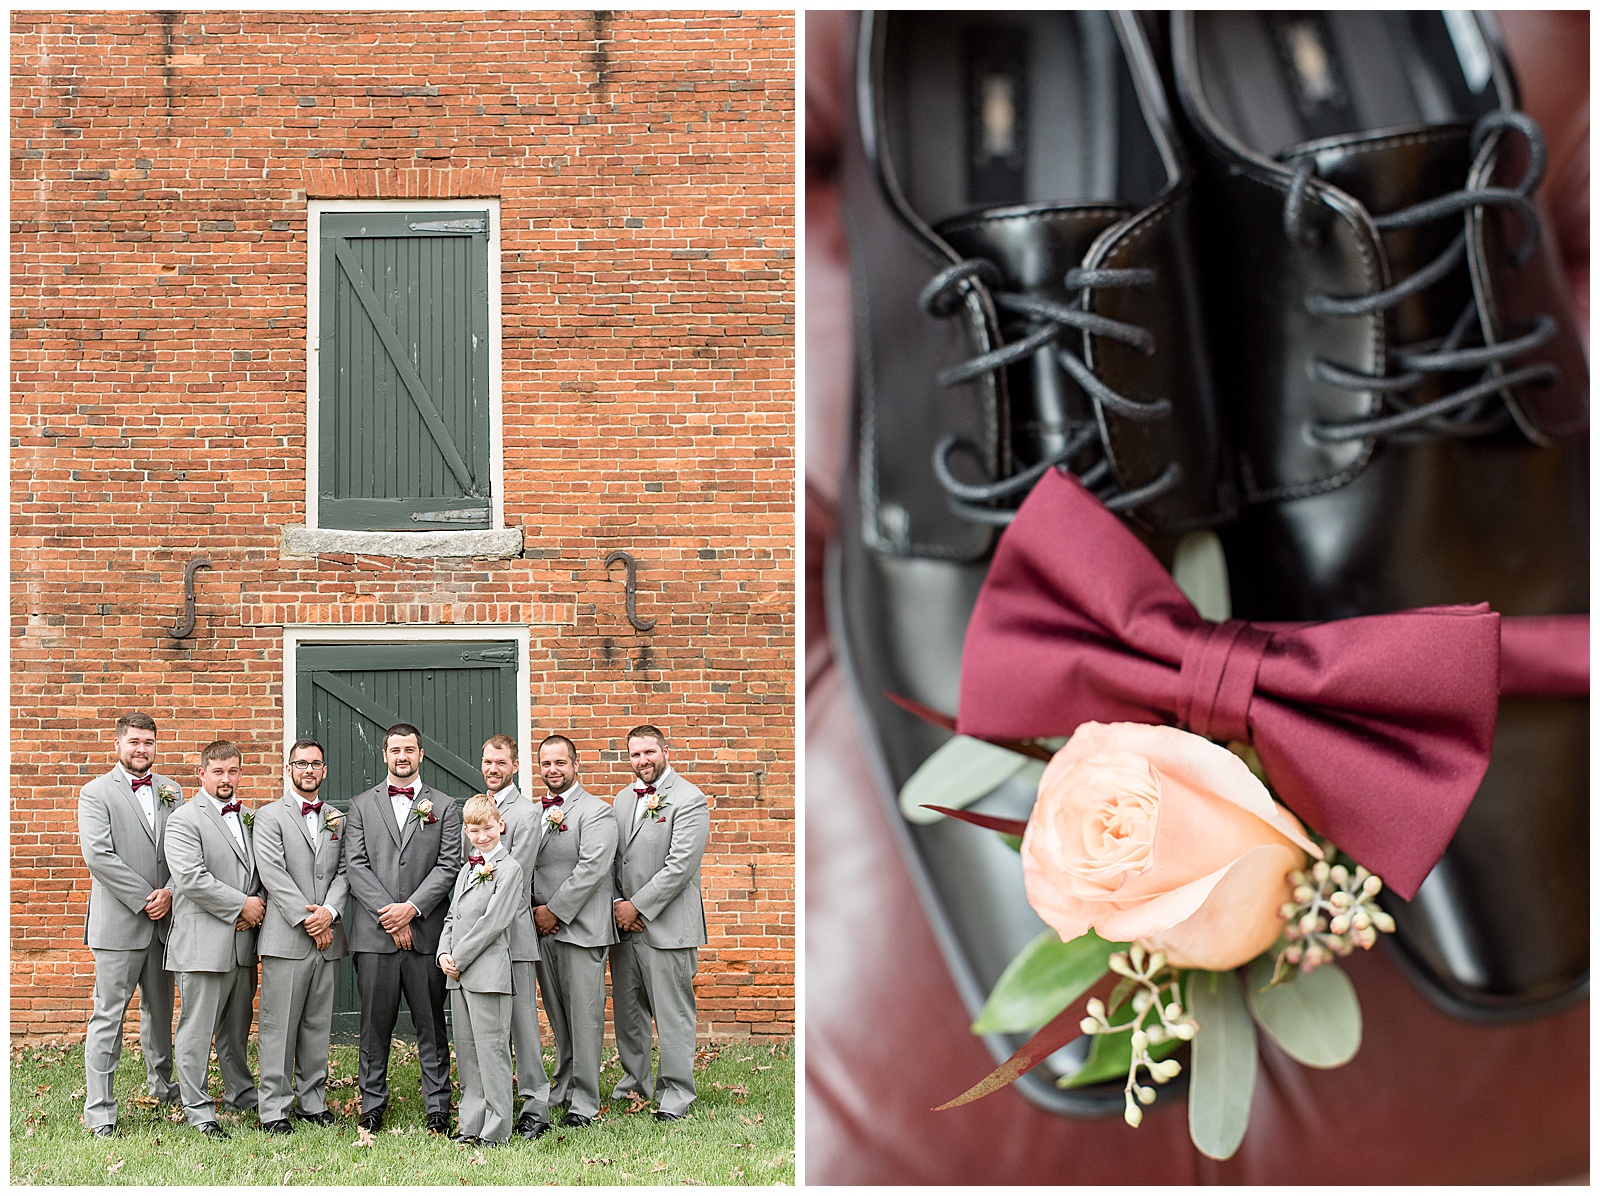 groom with groomsmen by brick building and grooms shoes with boutonniere